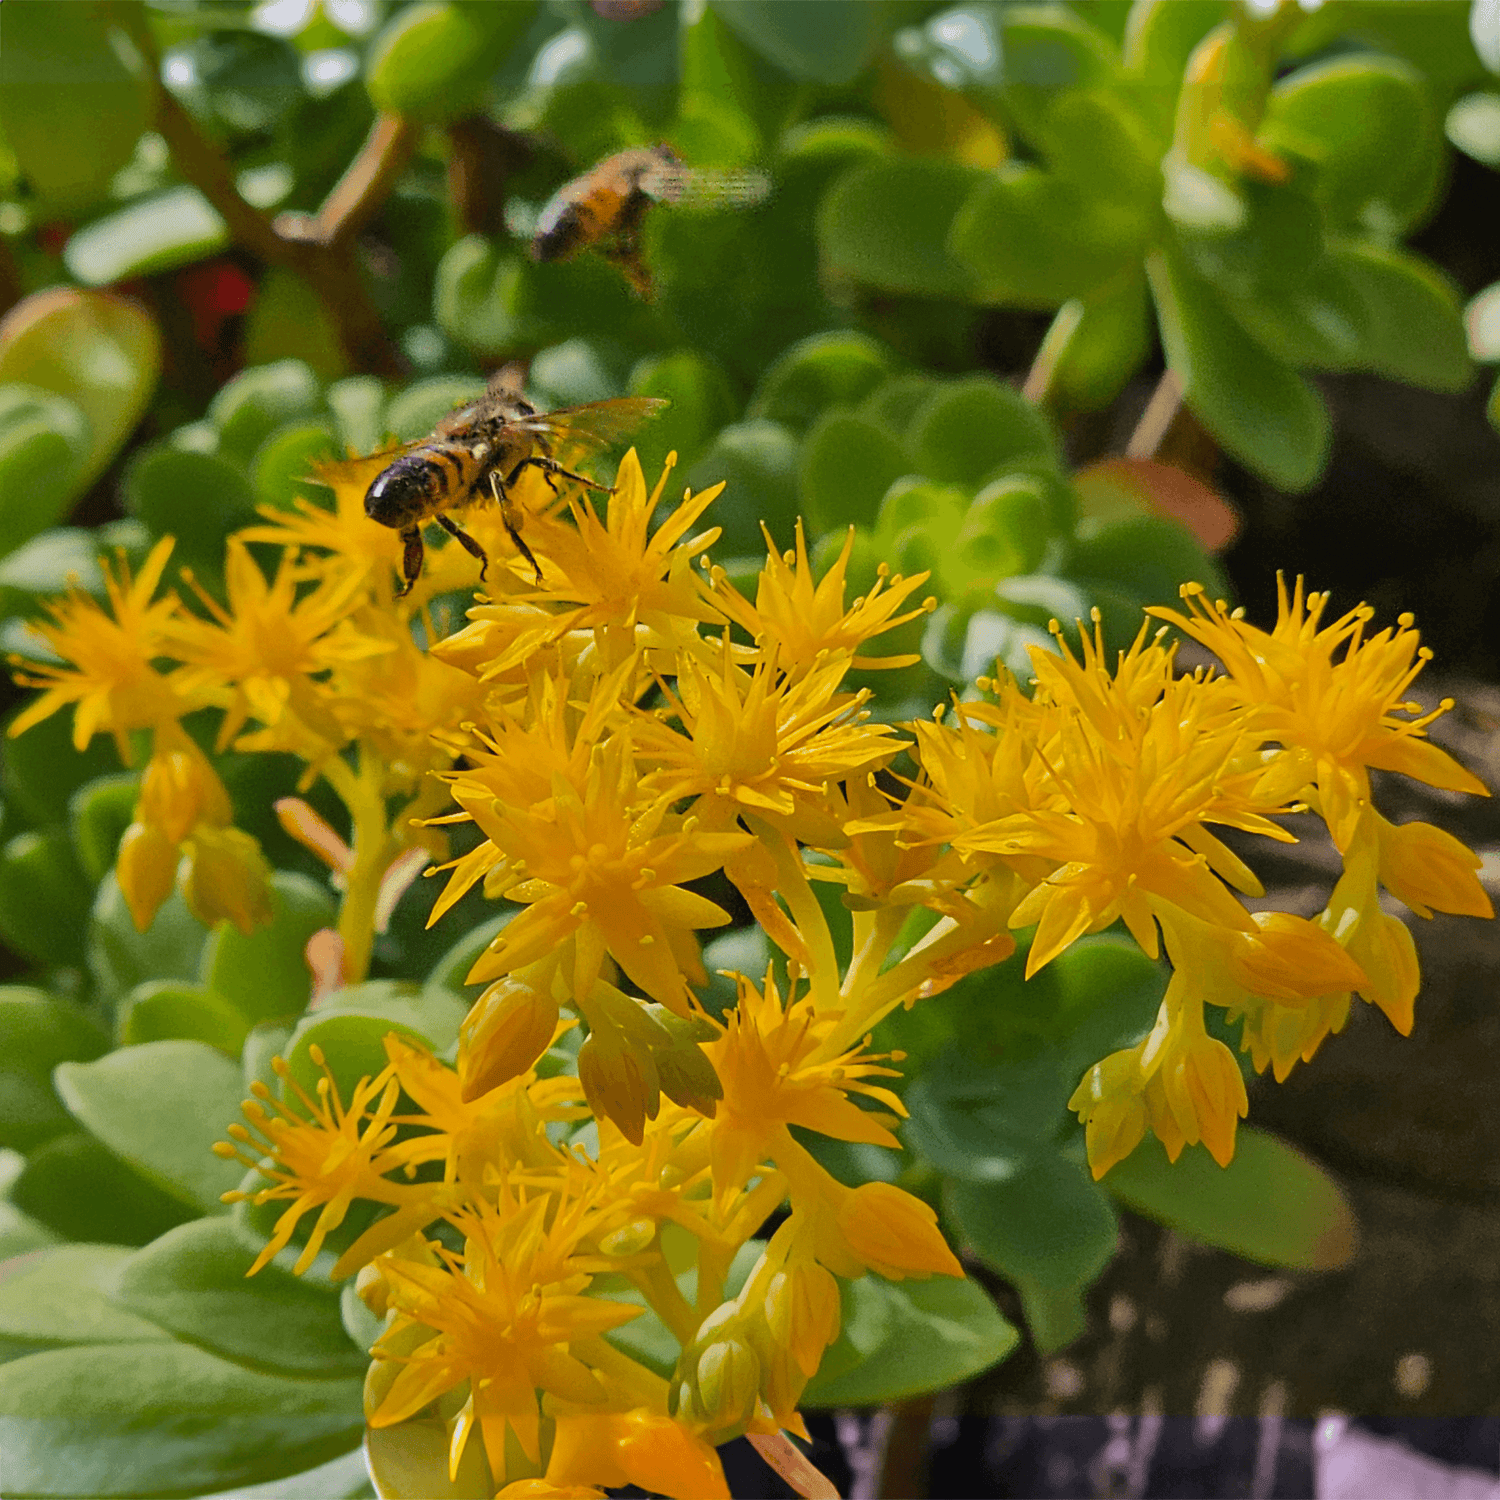 bees in plant grown with biozomeboost